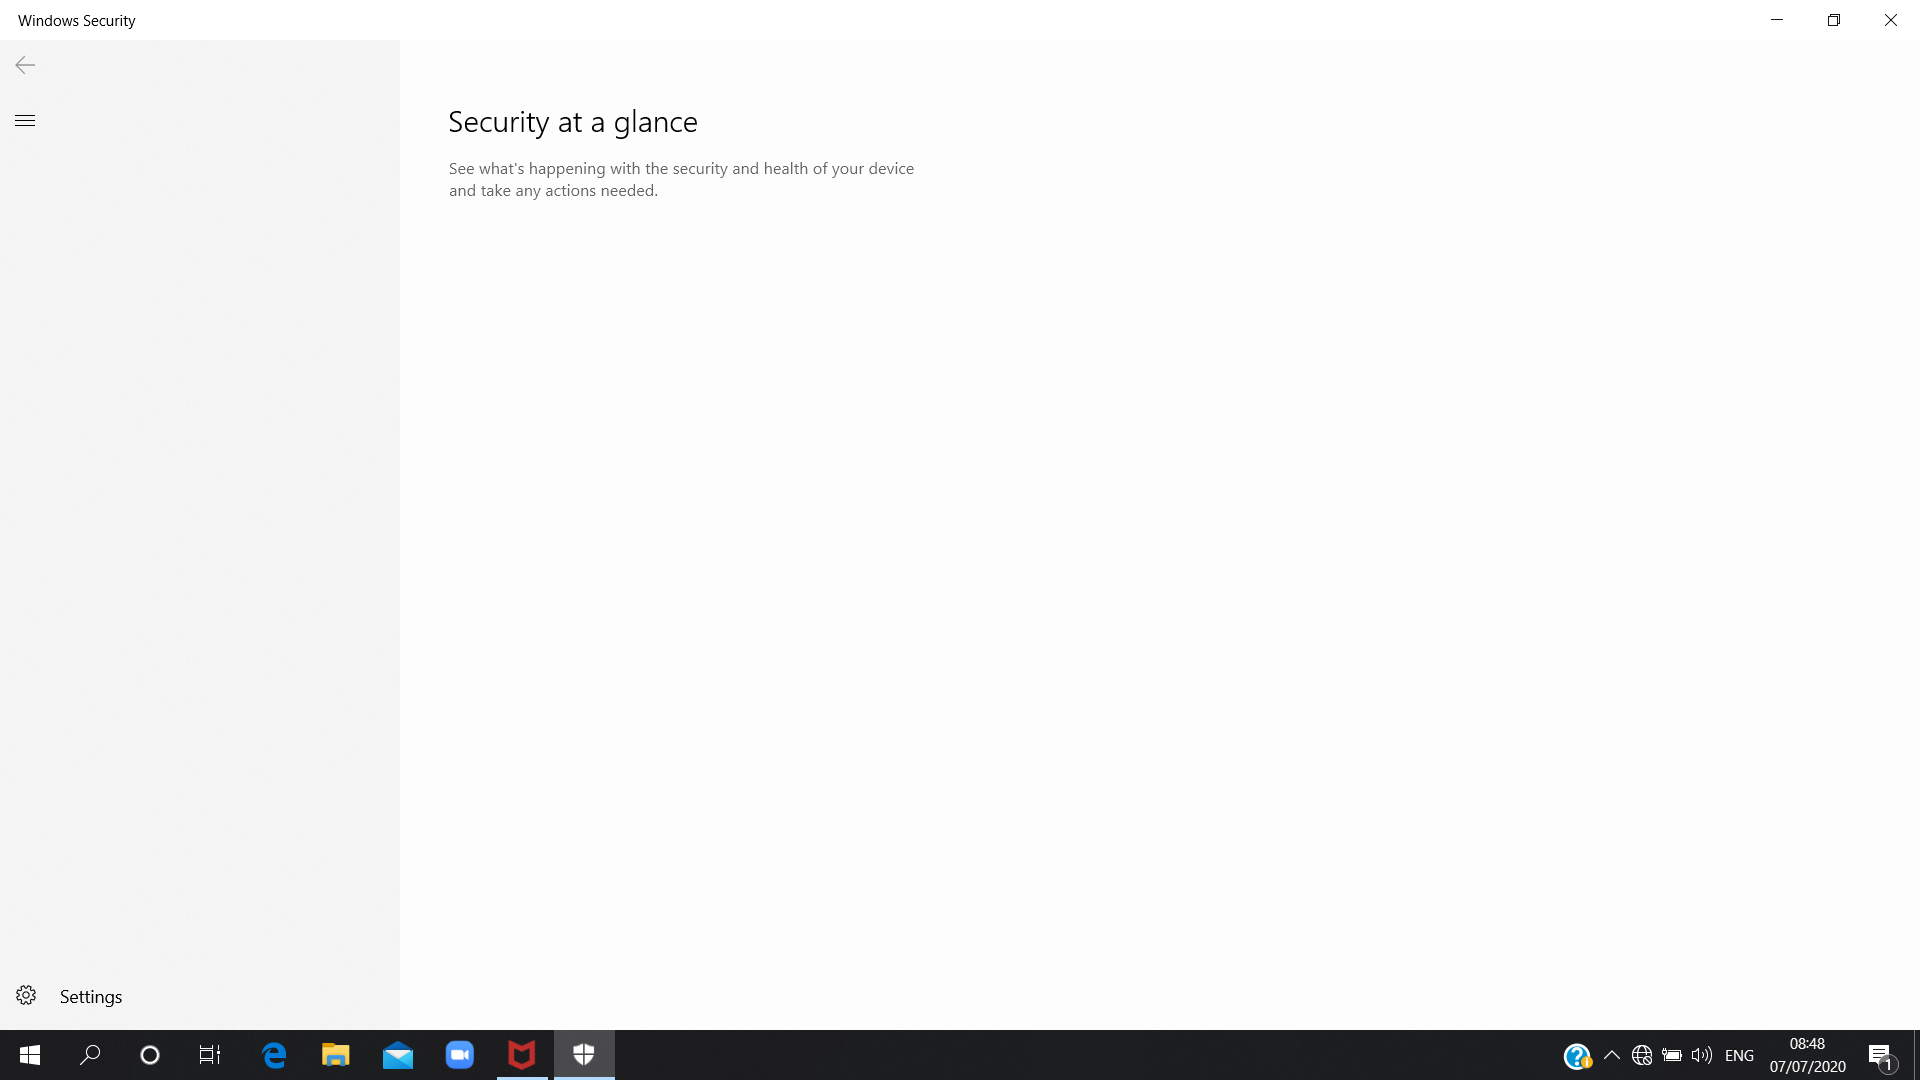 Windows Defender is not being Displayed 83e9adc3-a01a-4685-960f-0785aab2e9ca?upload=true.png